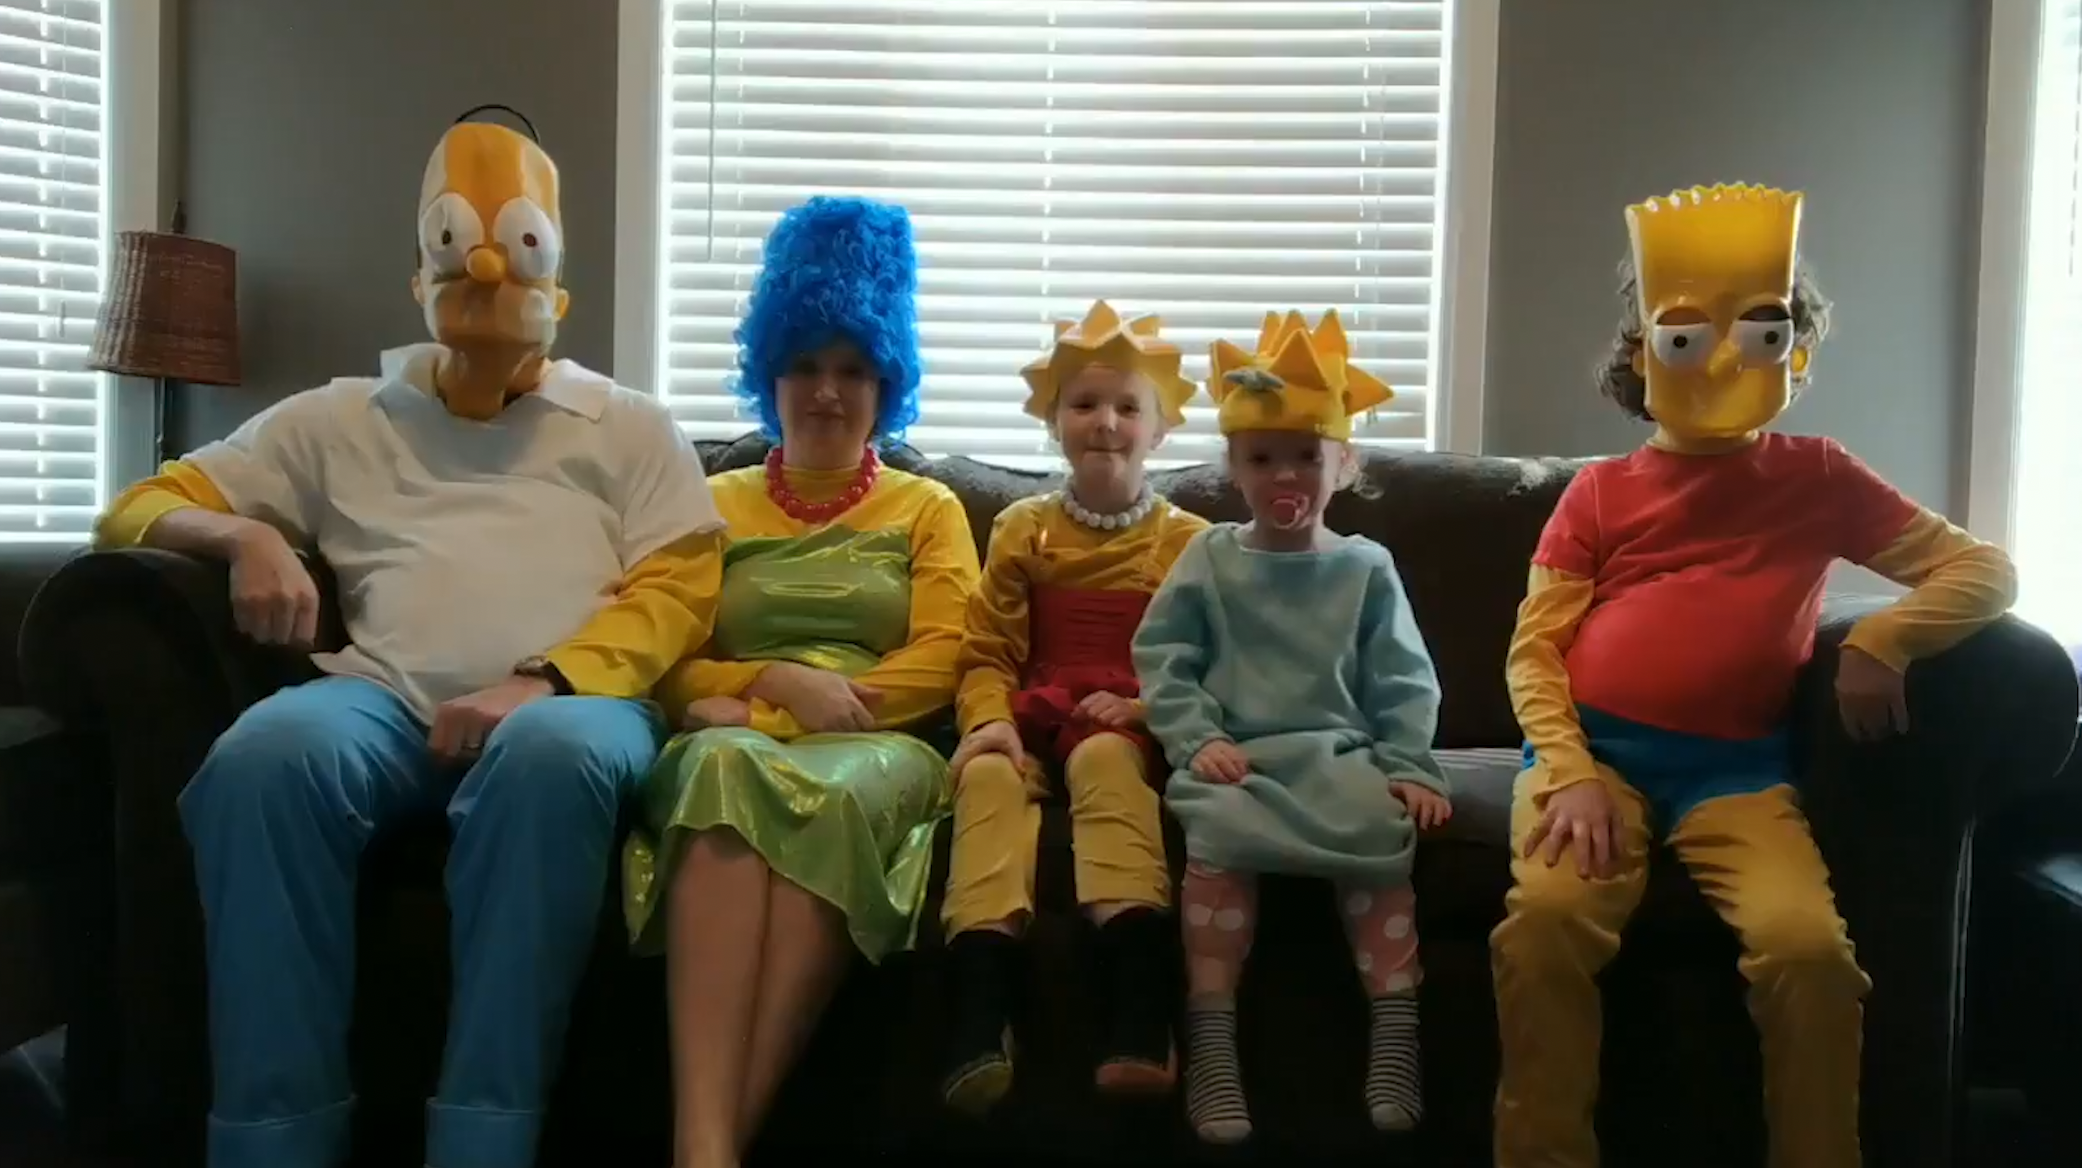 Joel Sutherland and his family dressed as The Simpsons sat on the sofa